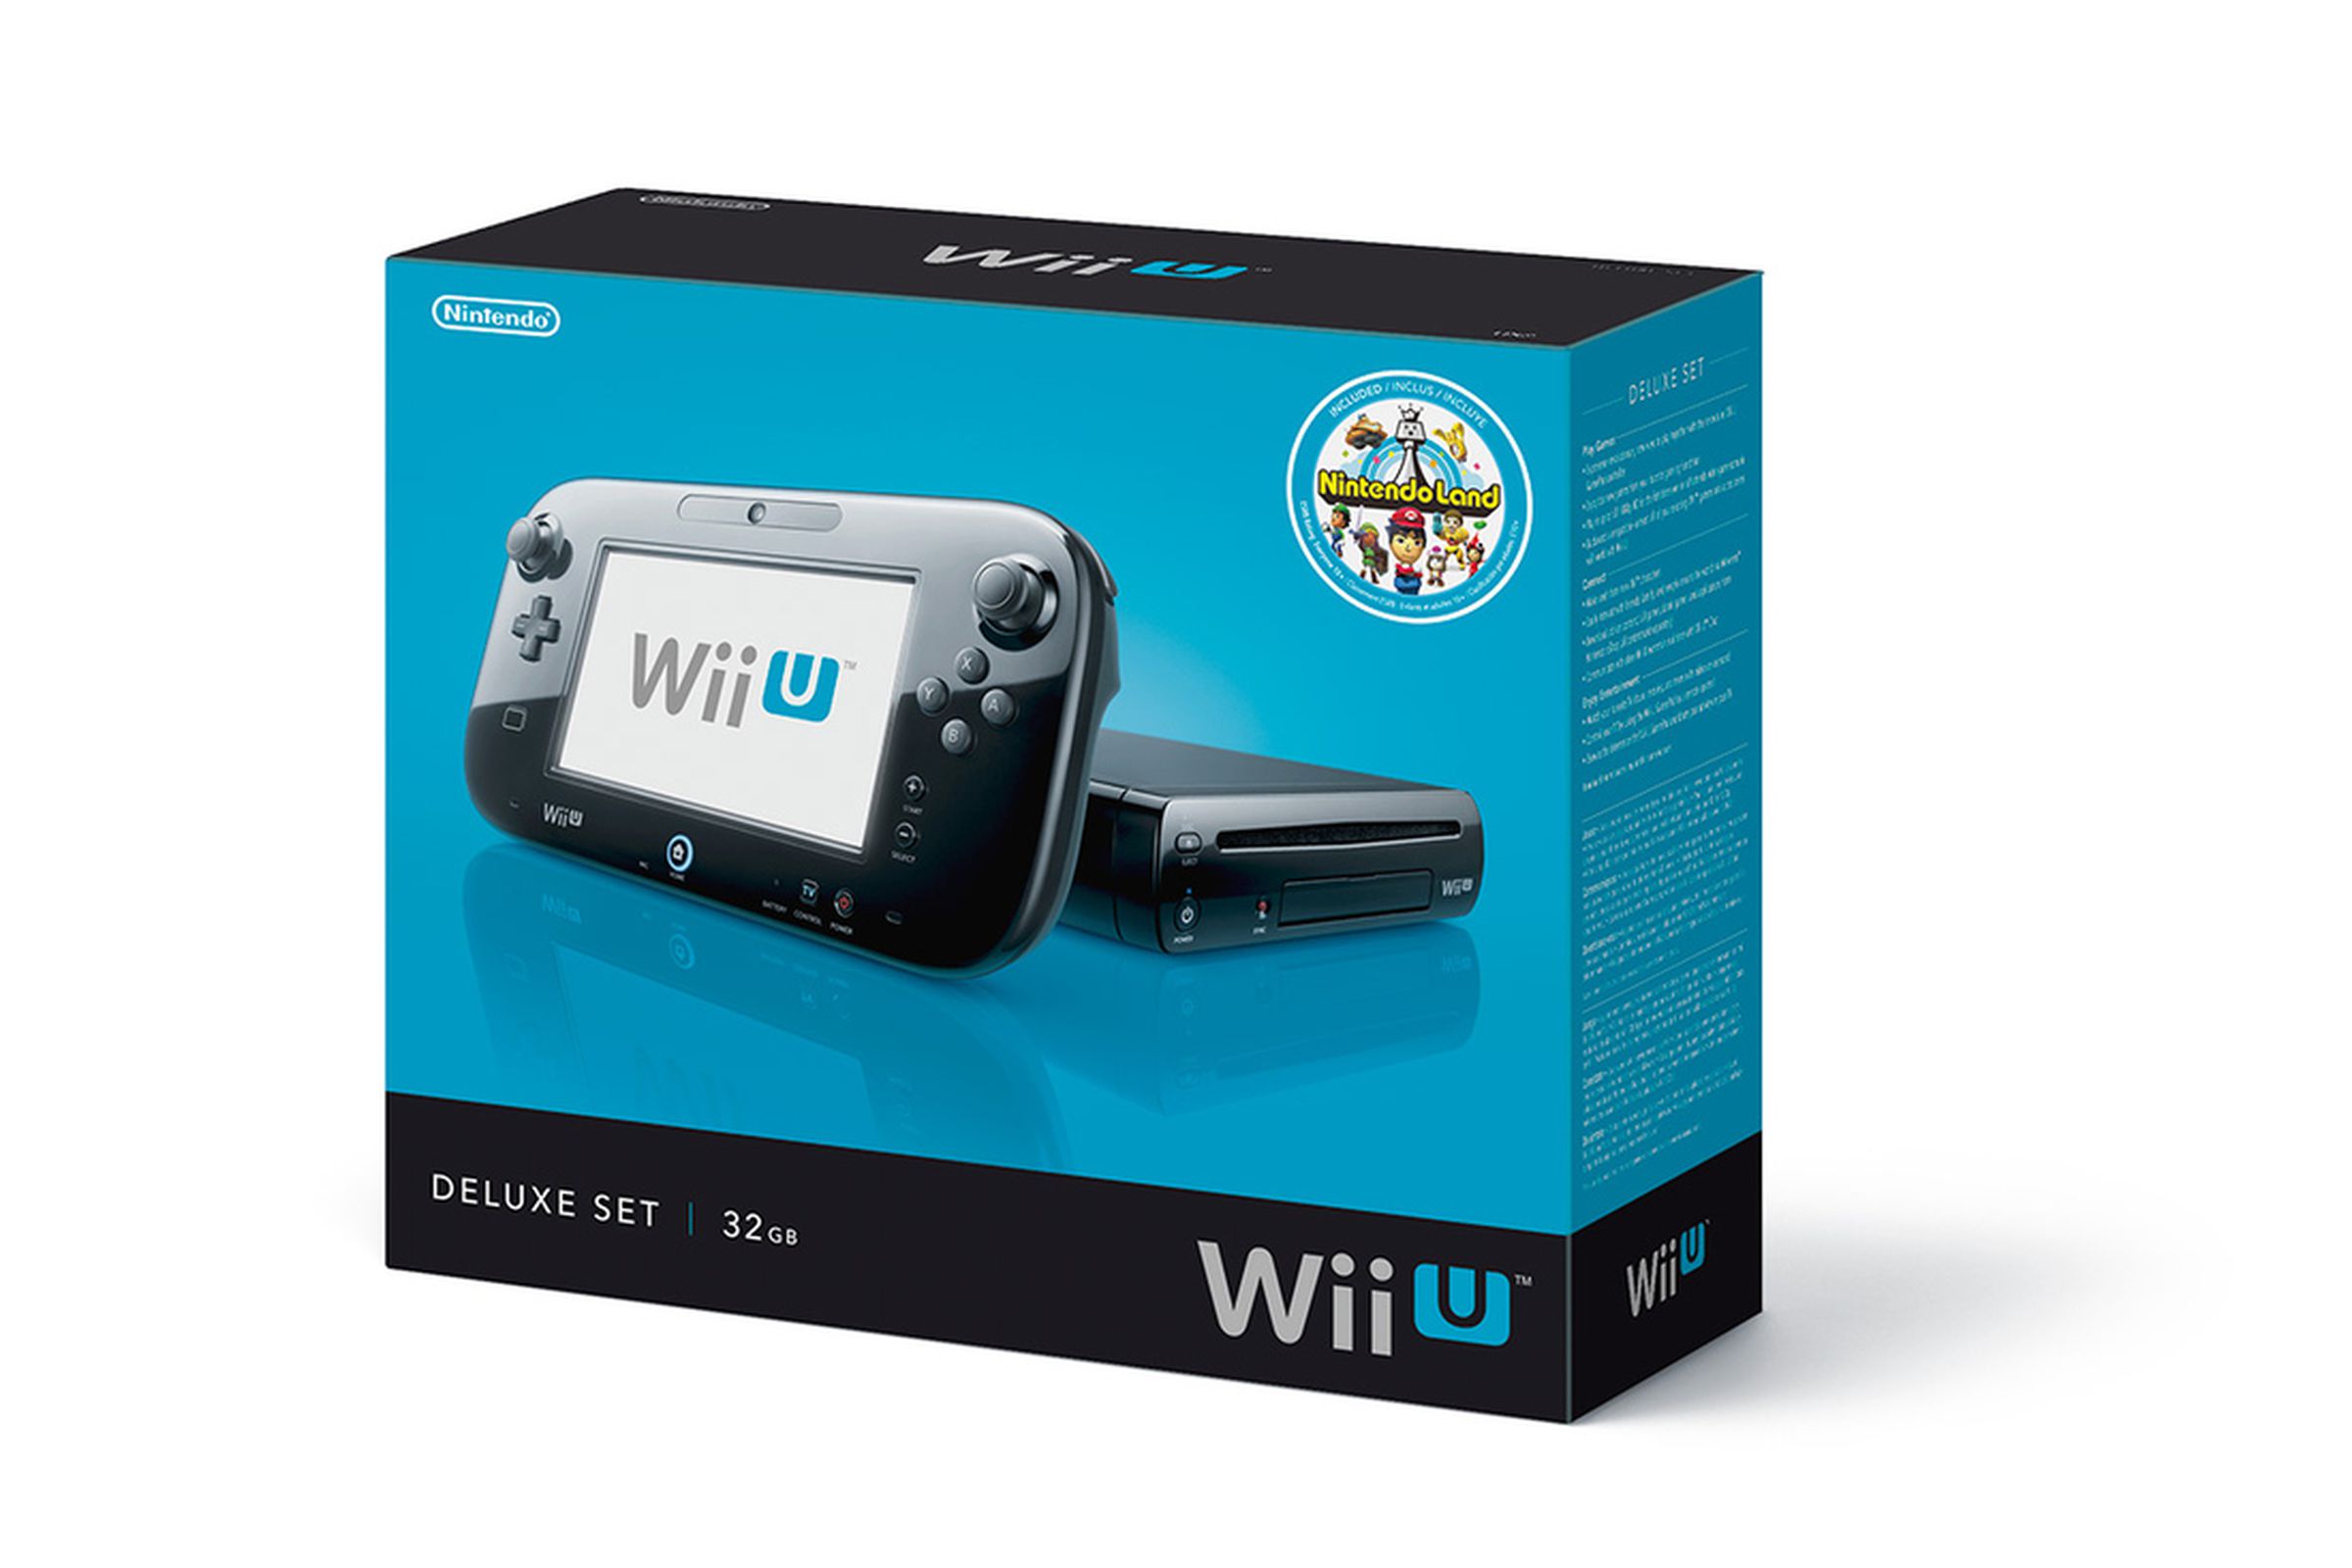 Gallery Photo: Wii U hardware and accessory packshots